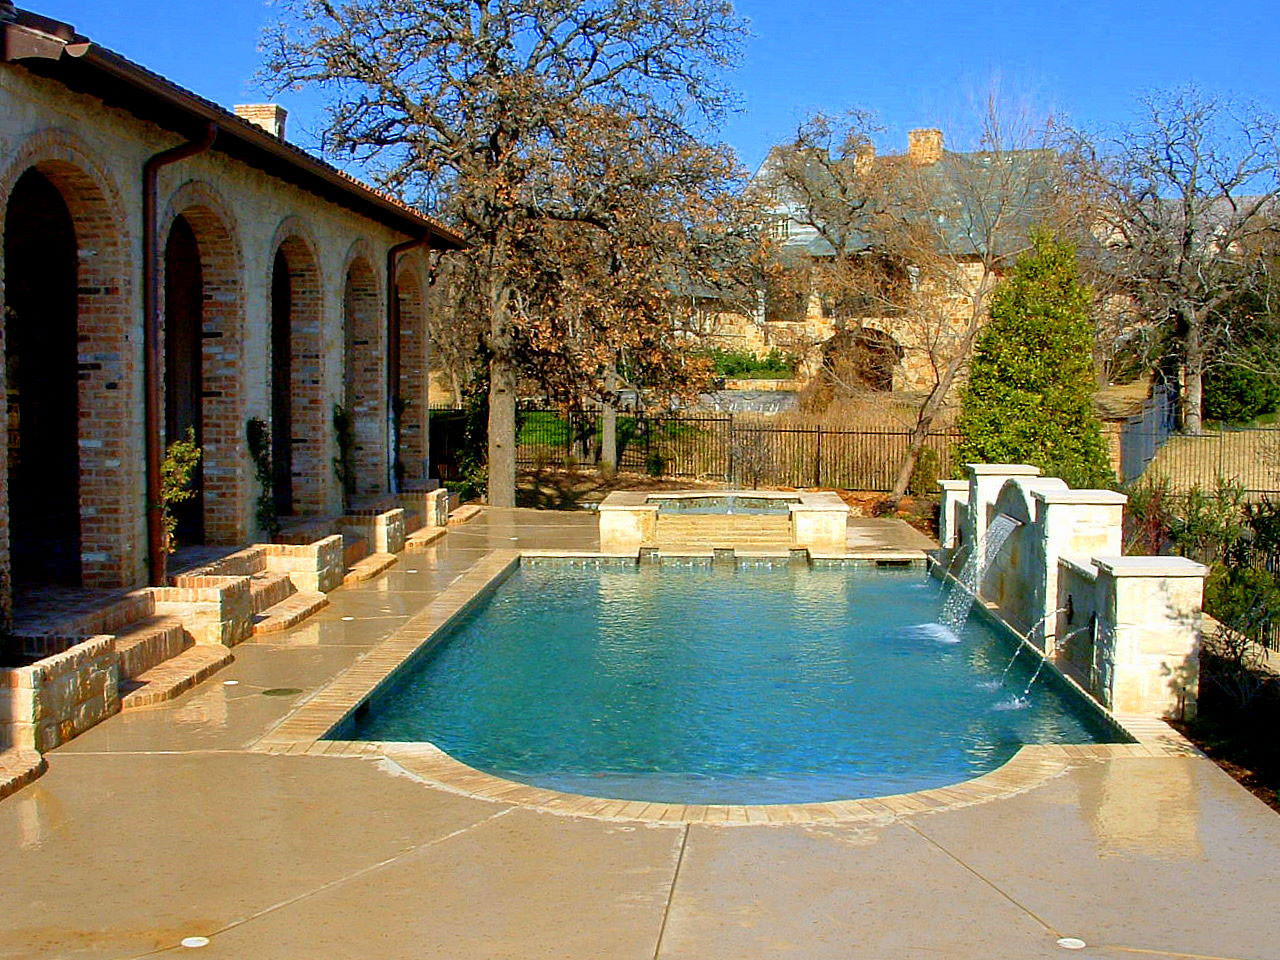 Pool Backyard Ideas
 Backyard Pool Ideas for a Better Relaxing Station to Try